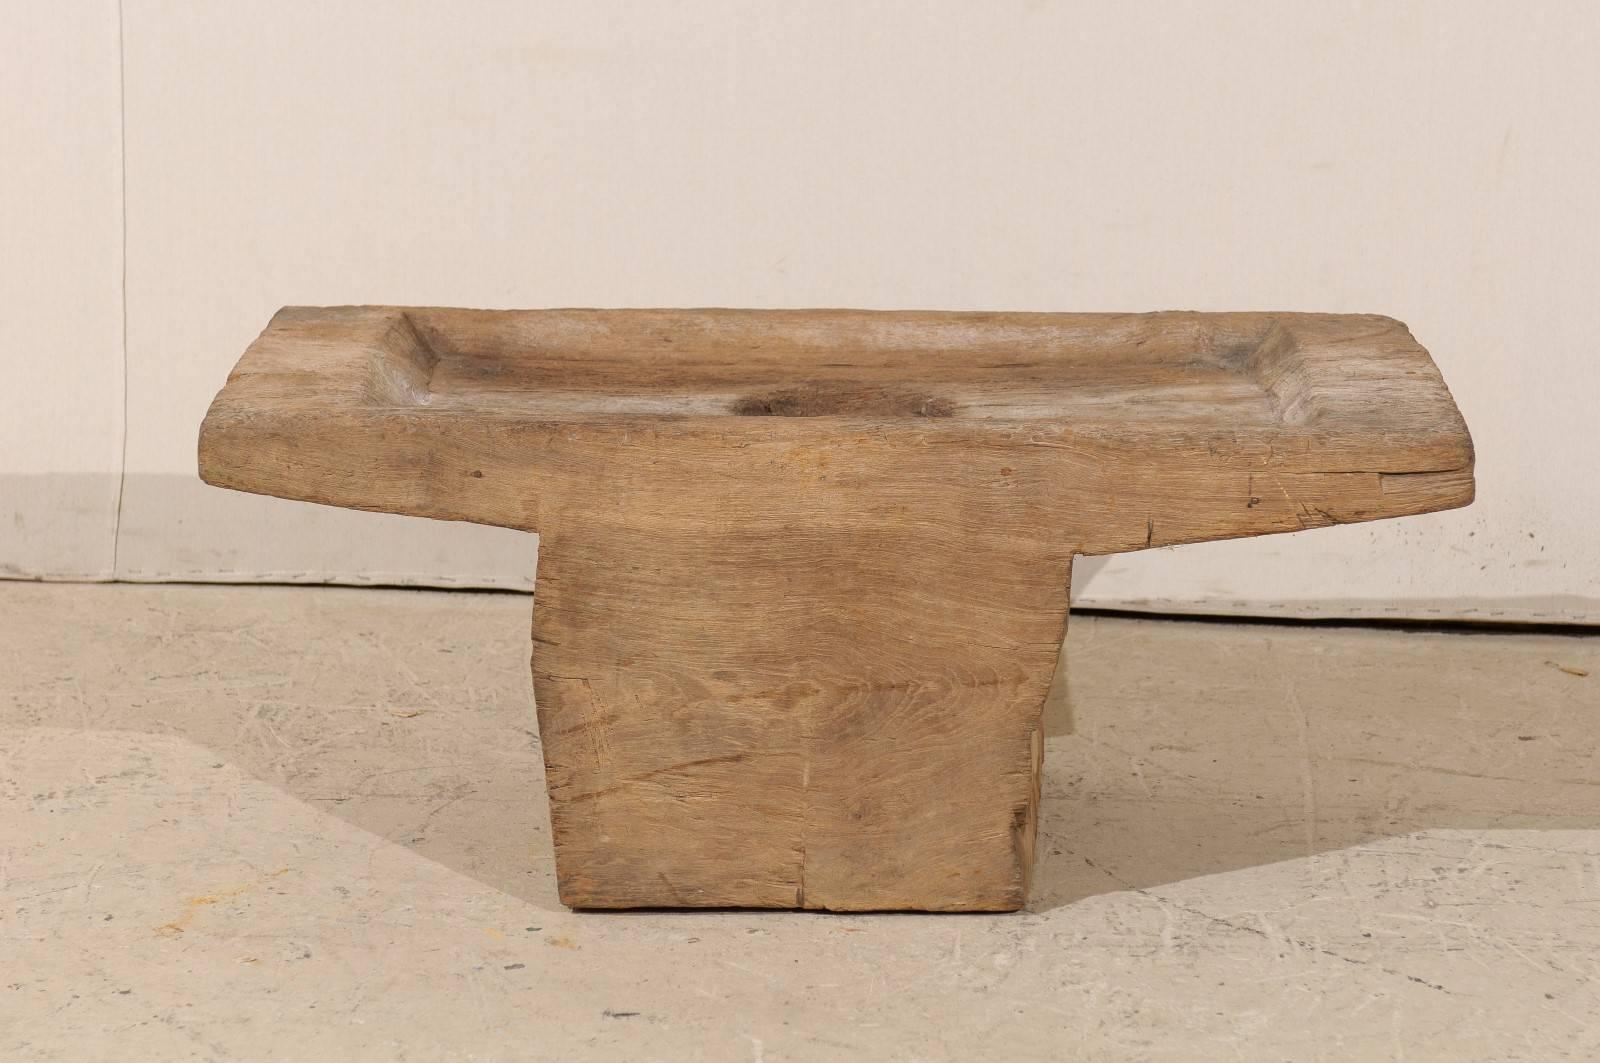 A unique and rustic wooden coffee table. Originally an Indonesian grain grinder from the early 20th century, this piece has been given a new life and makes for a great little coffee table. The color is of a light brown. This coffee table would look